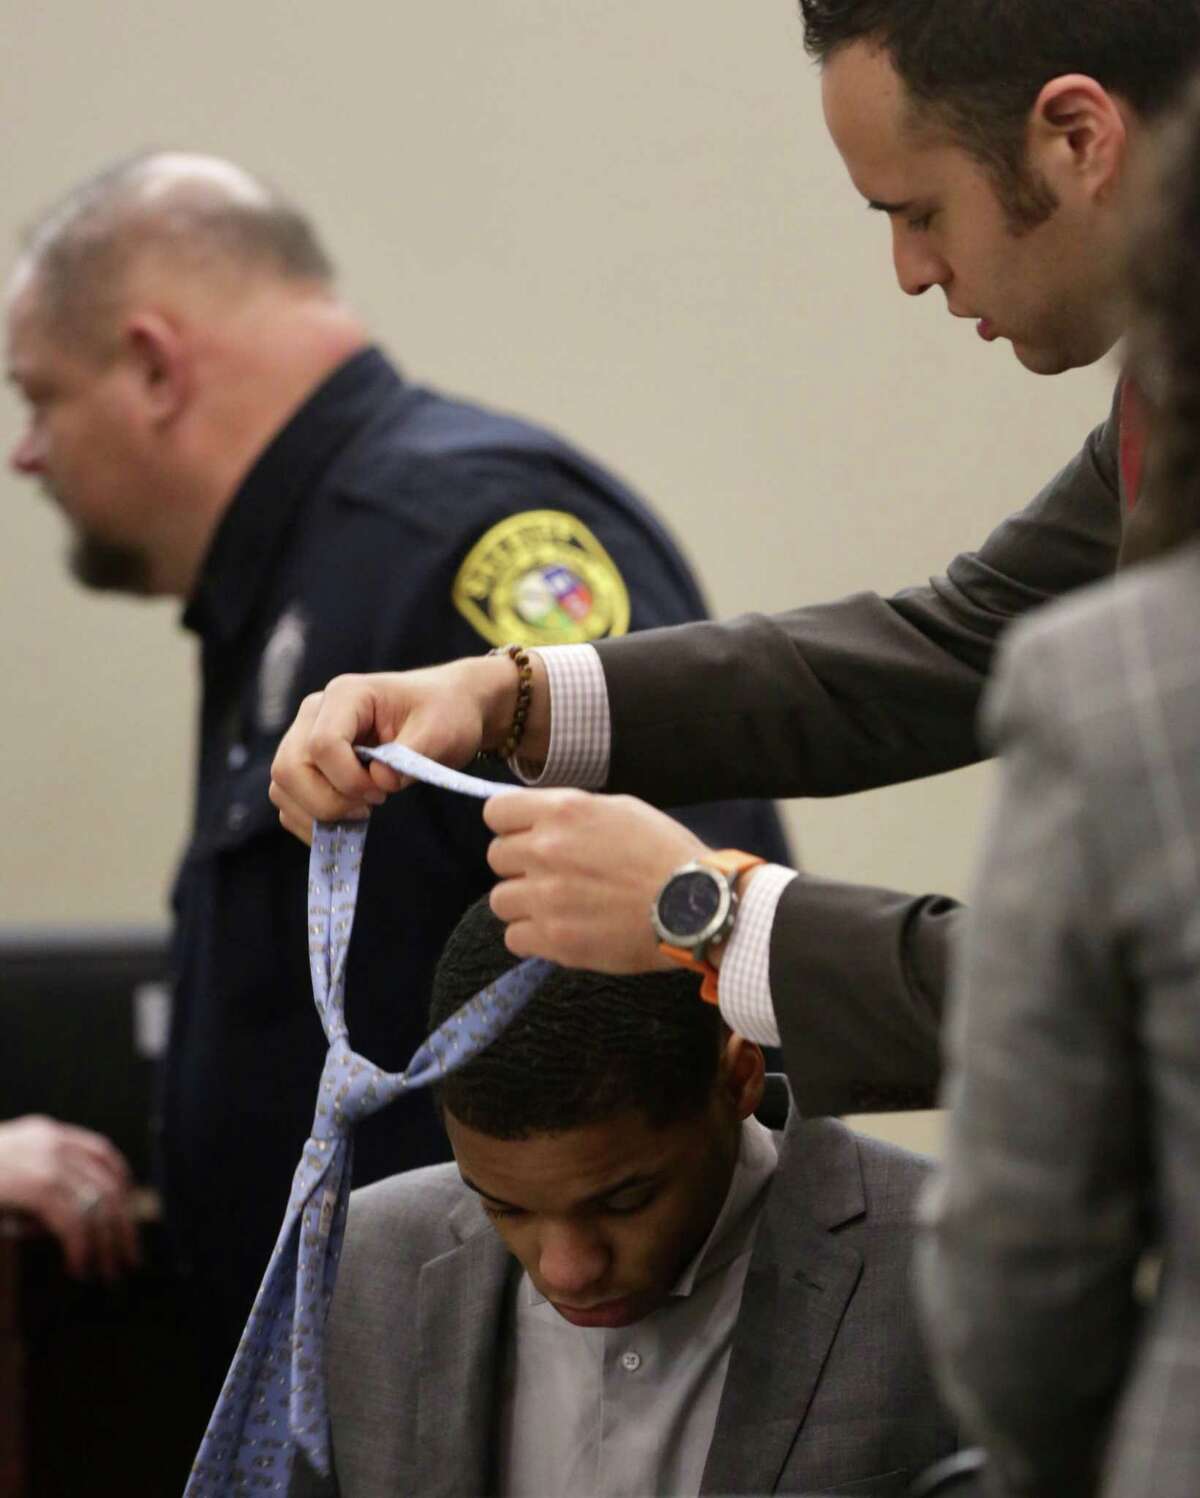 Anton Harris is helped by his lawyer Jonathan Watkins putting on a tie in the 399th State District Court in the Cadena-Reeves Justice Center during the punishment phase, convicted Wednesday in the rape of a nurse in the Medical Center area in 2017. He faces up to life in prison.